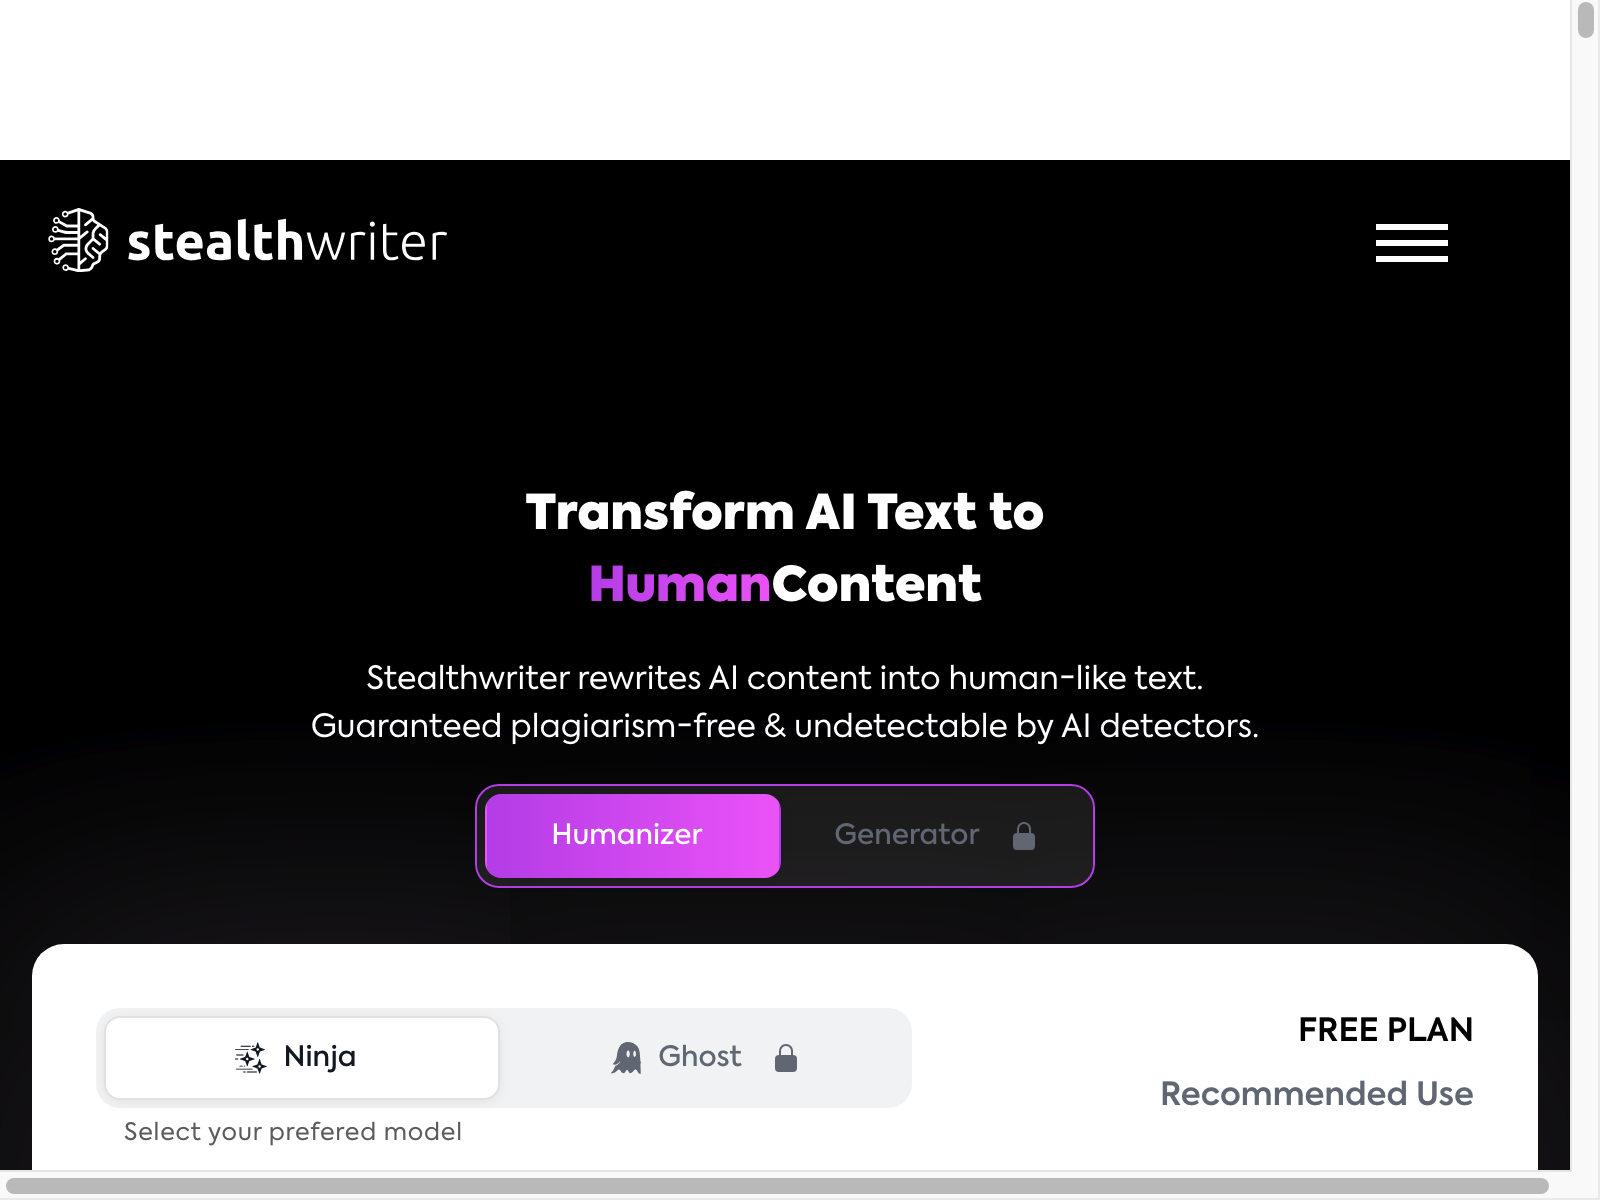 stealth writer ai Review: Pros, Cons, Alternatives